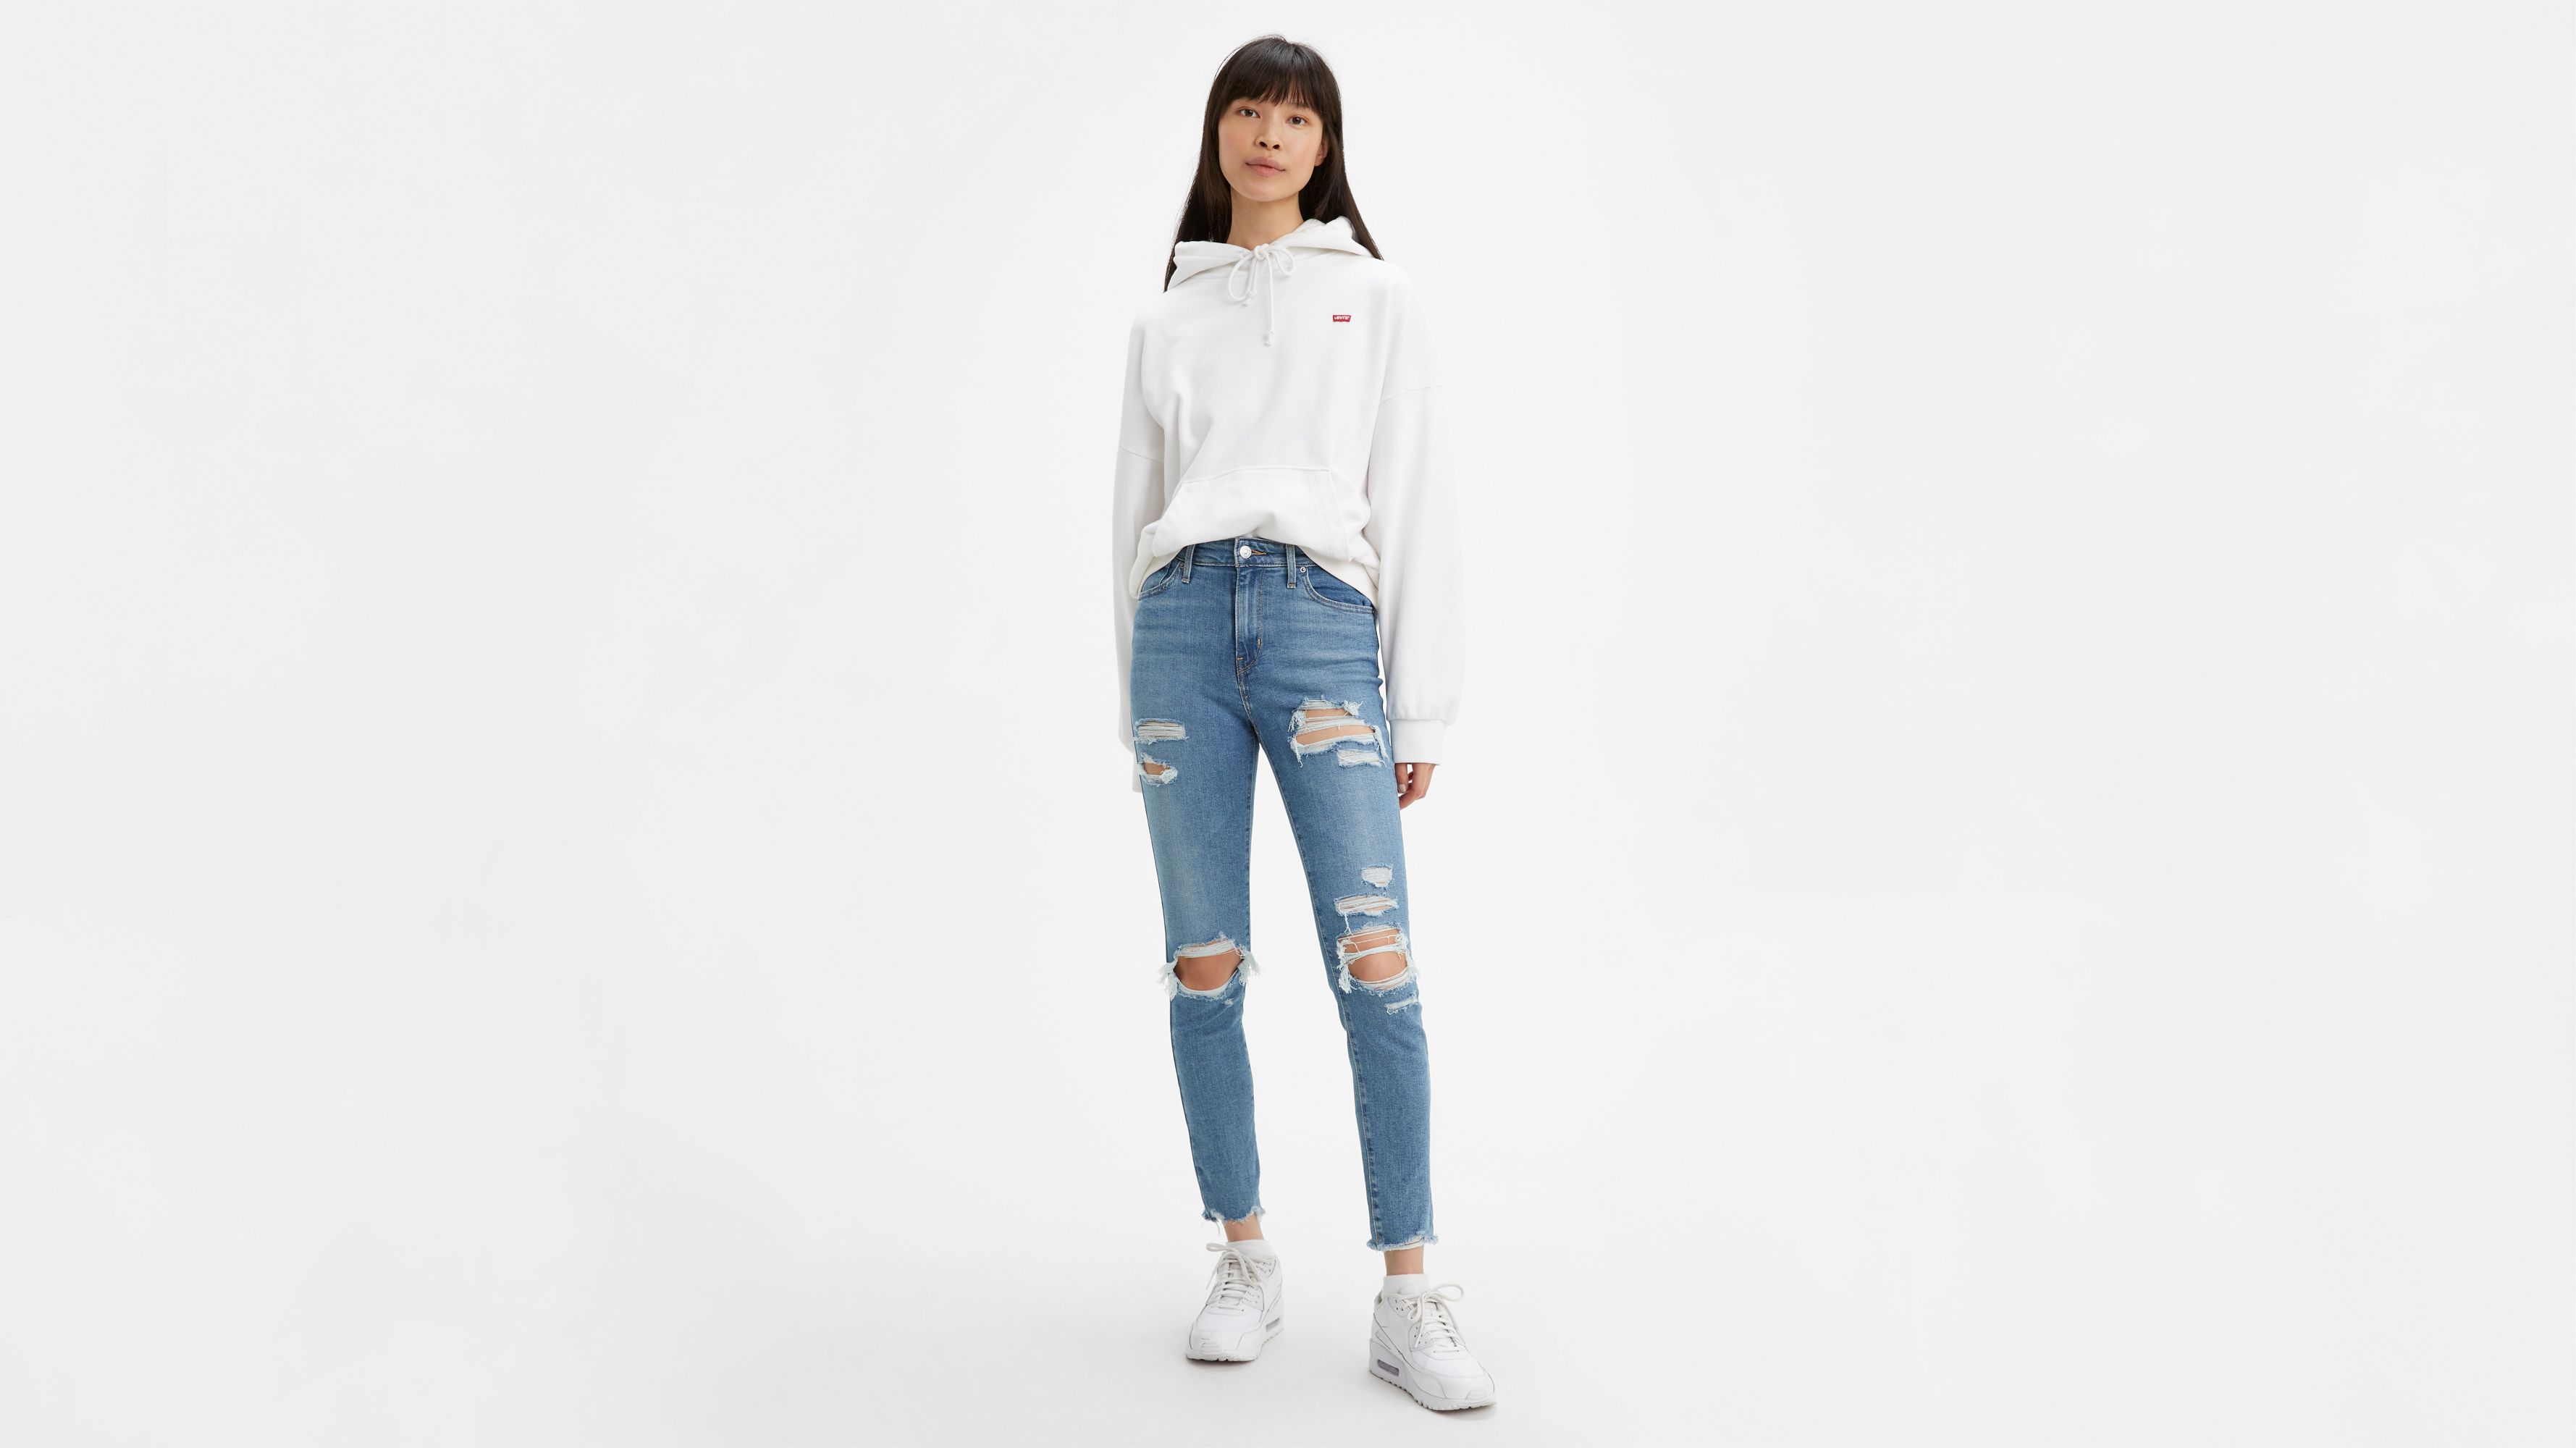 721 High Rise Ankle Skinny Women's Jeans - Medium Wash | Levi's® US